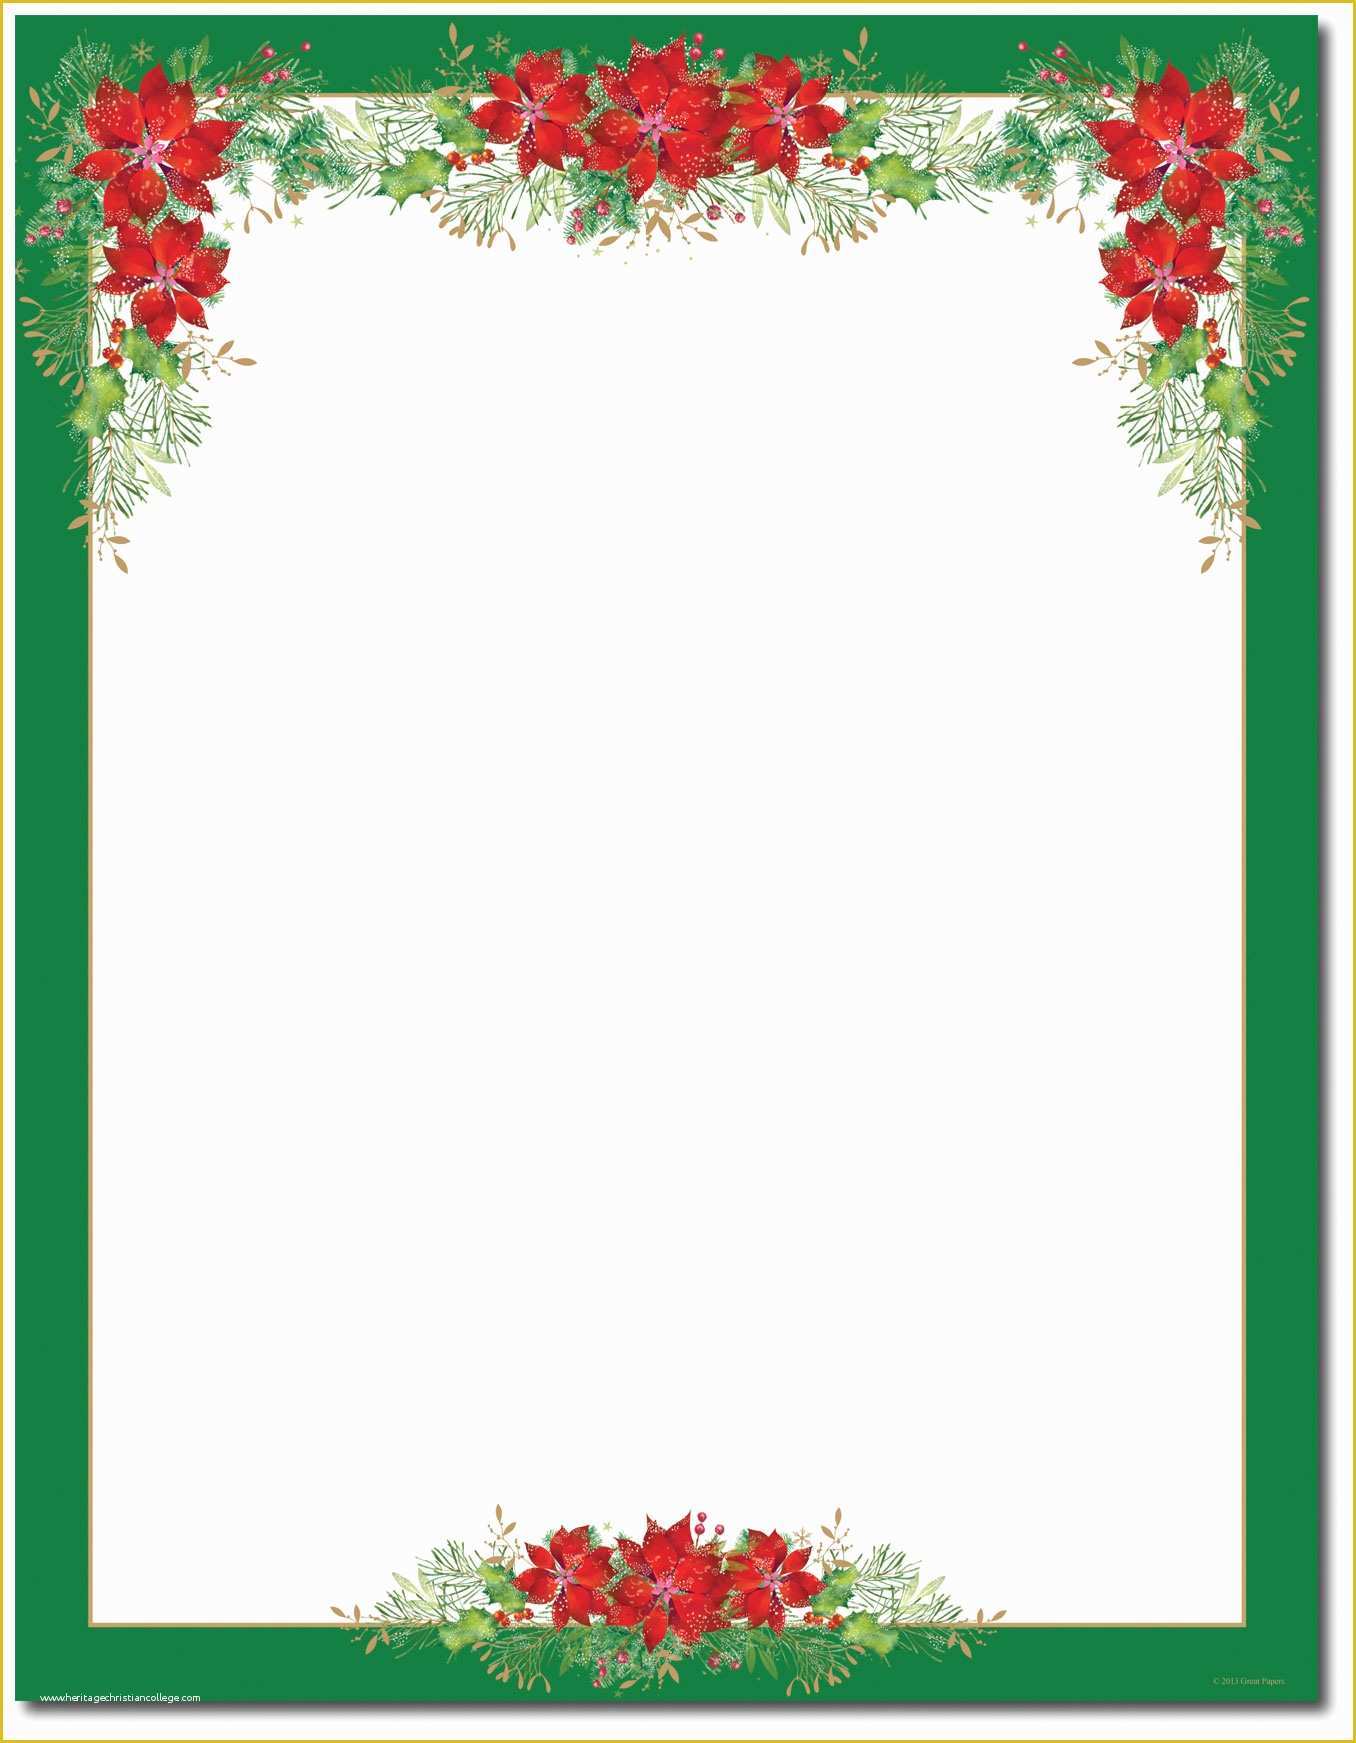 Christmas Letter Border Templates Free Of Christmas Stationery Printer Paper